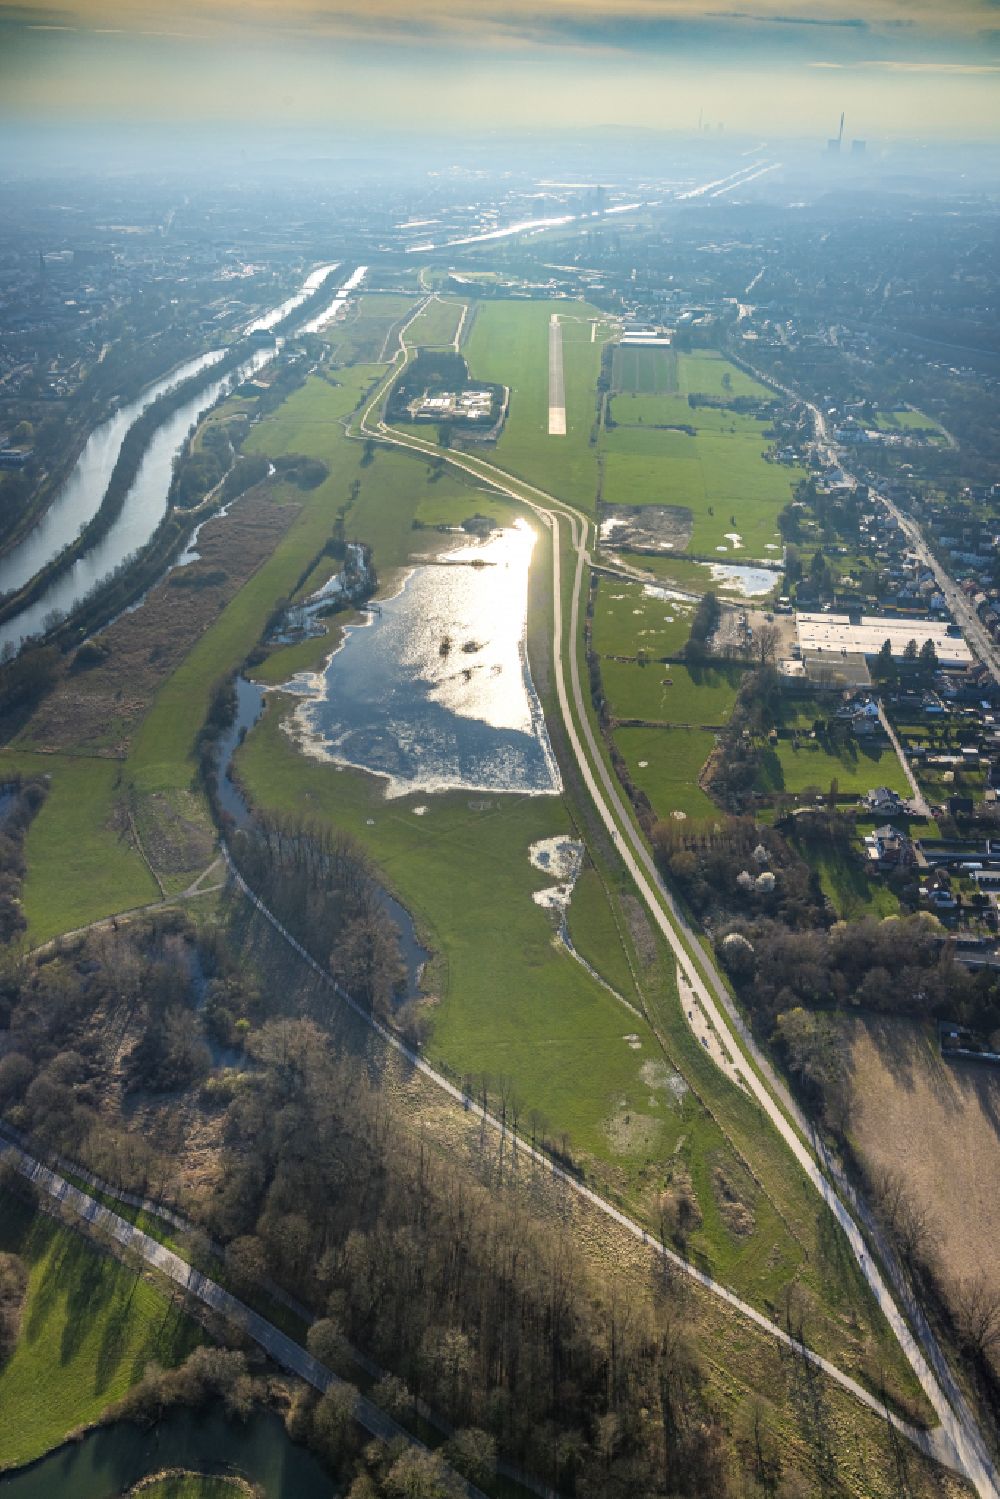 Aerial photograph Heessen - Riparian areas and flooded flood meadows due to a river bed leading to flood levels Lippe in Heessen at Ruhrgebiet in the state North Rhine-Westphalia, Germany